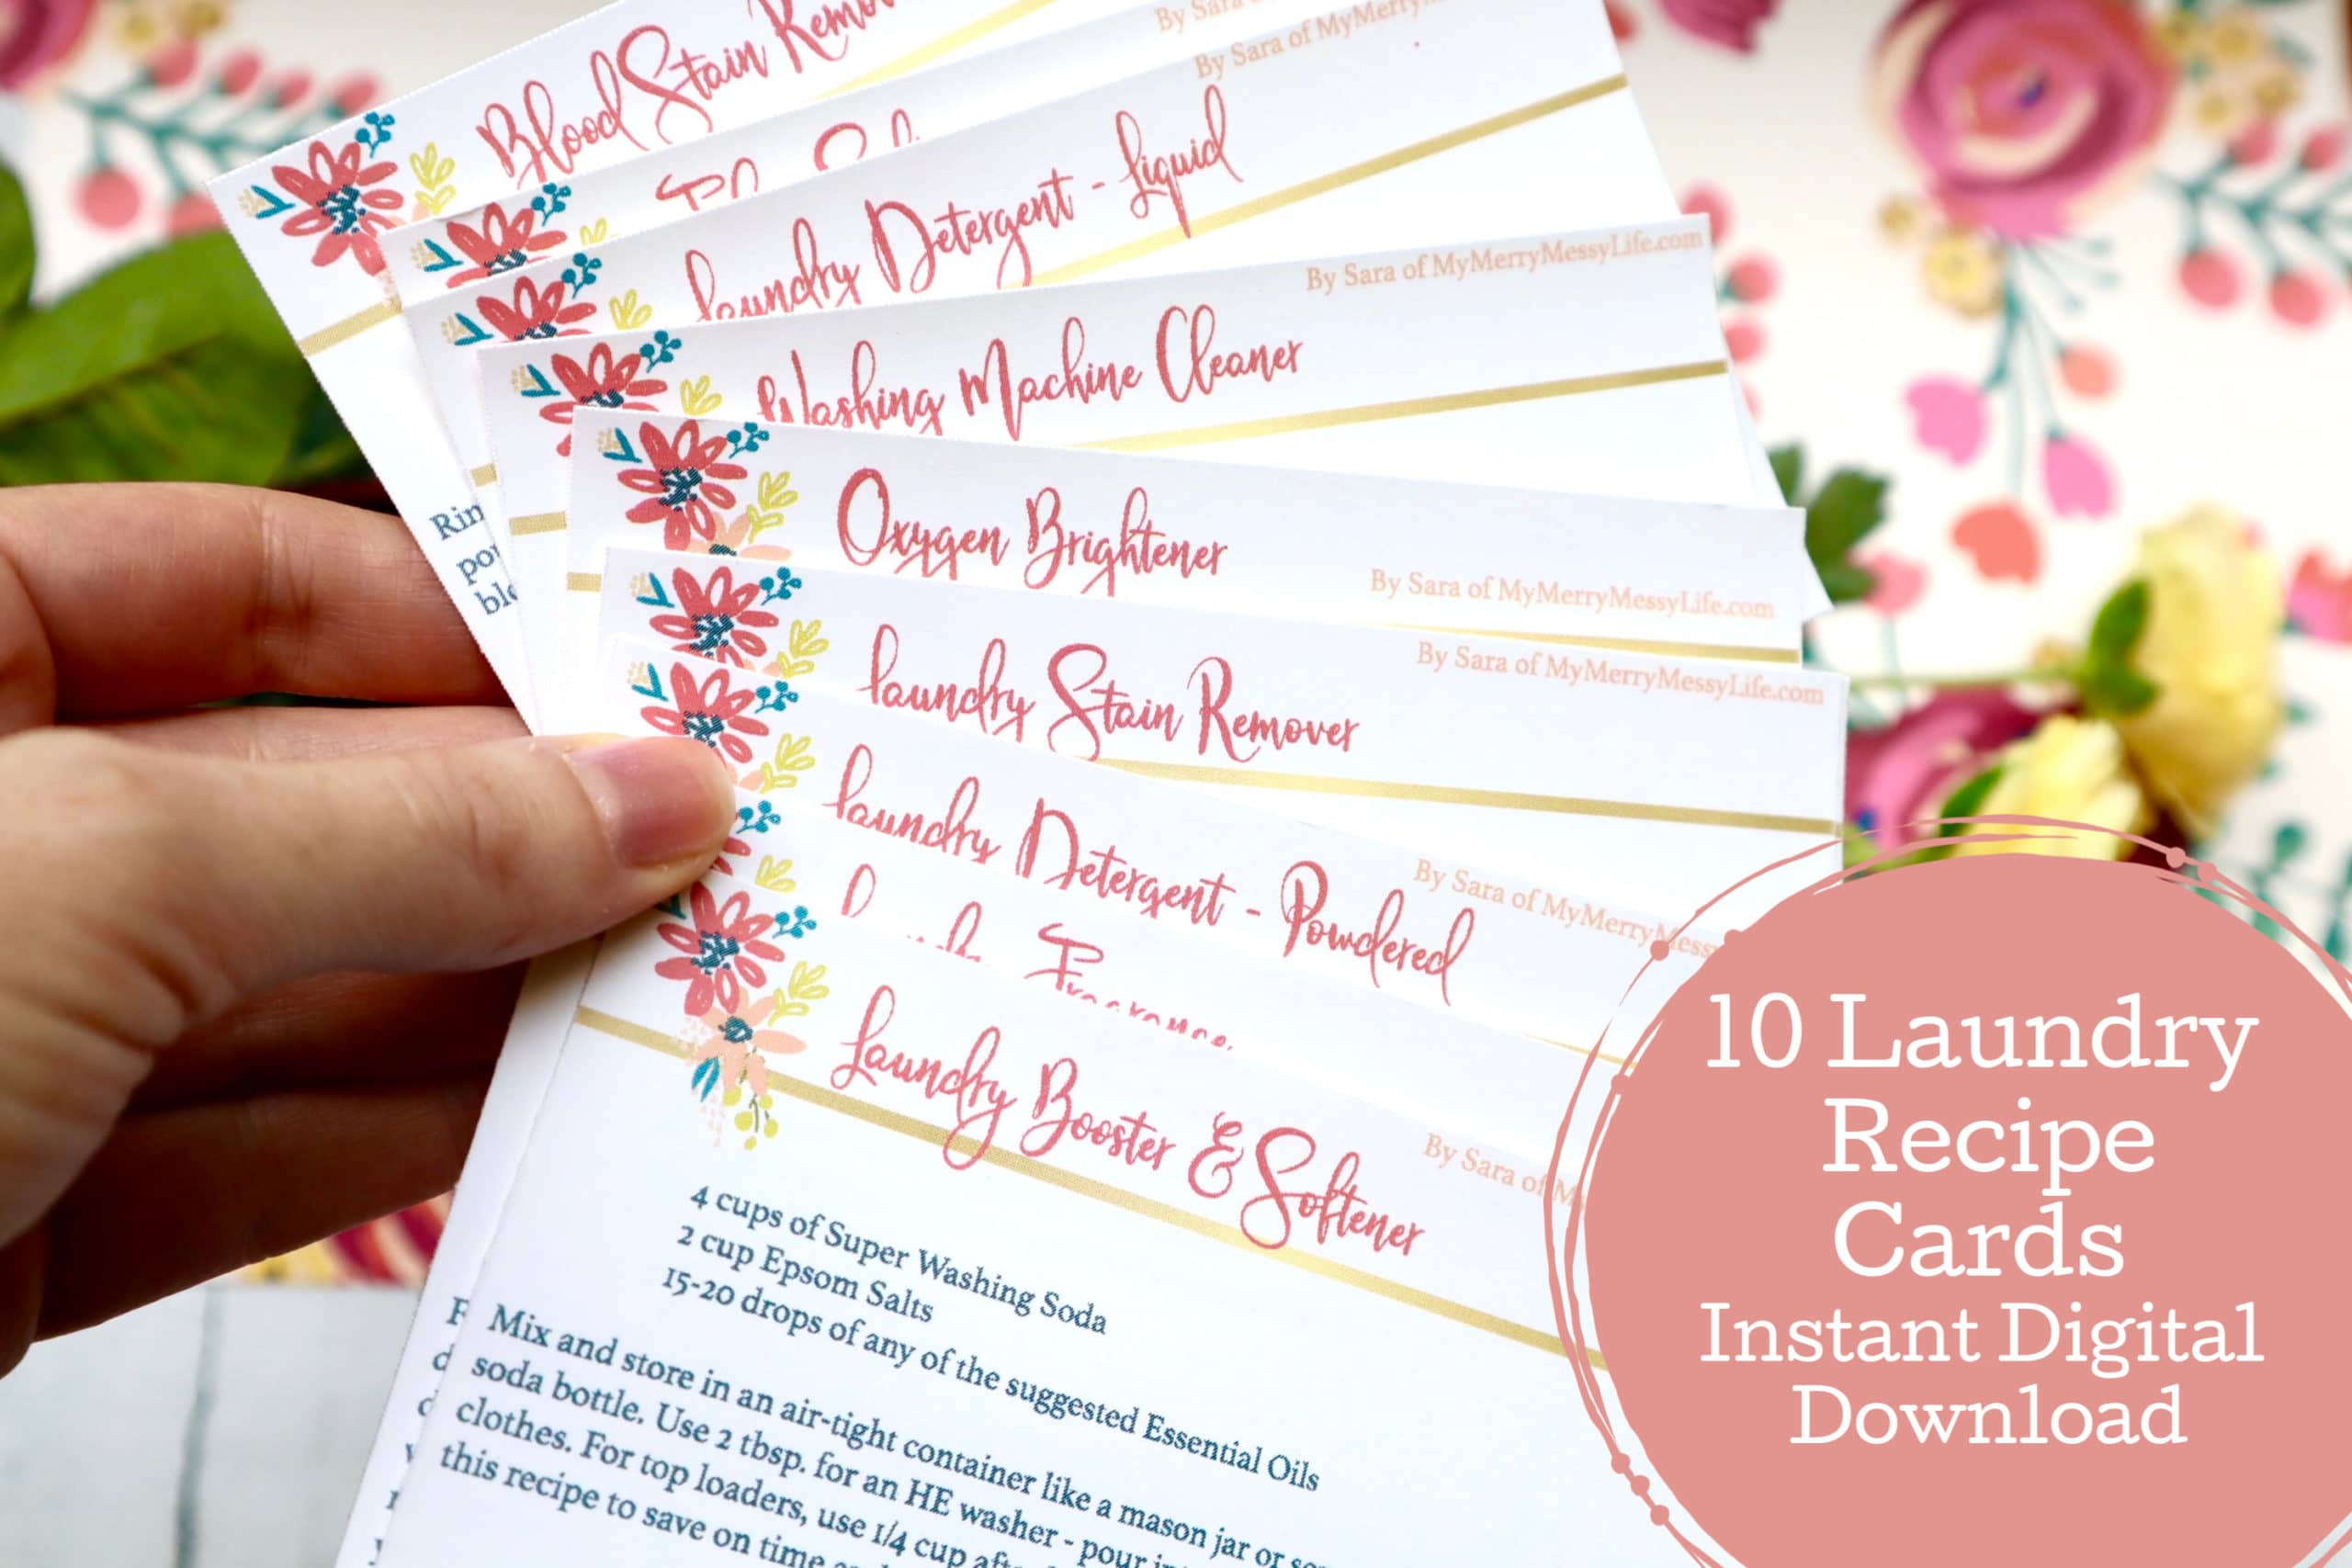 15 Printable Laundry Recipe Cards for a Natural, Nontoxic Laundry Room Routine